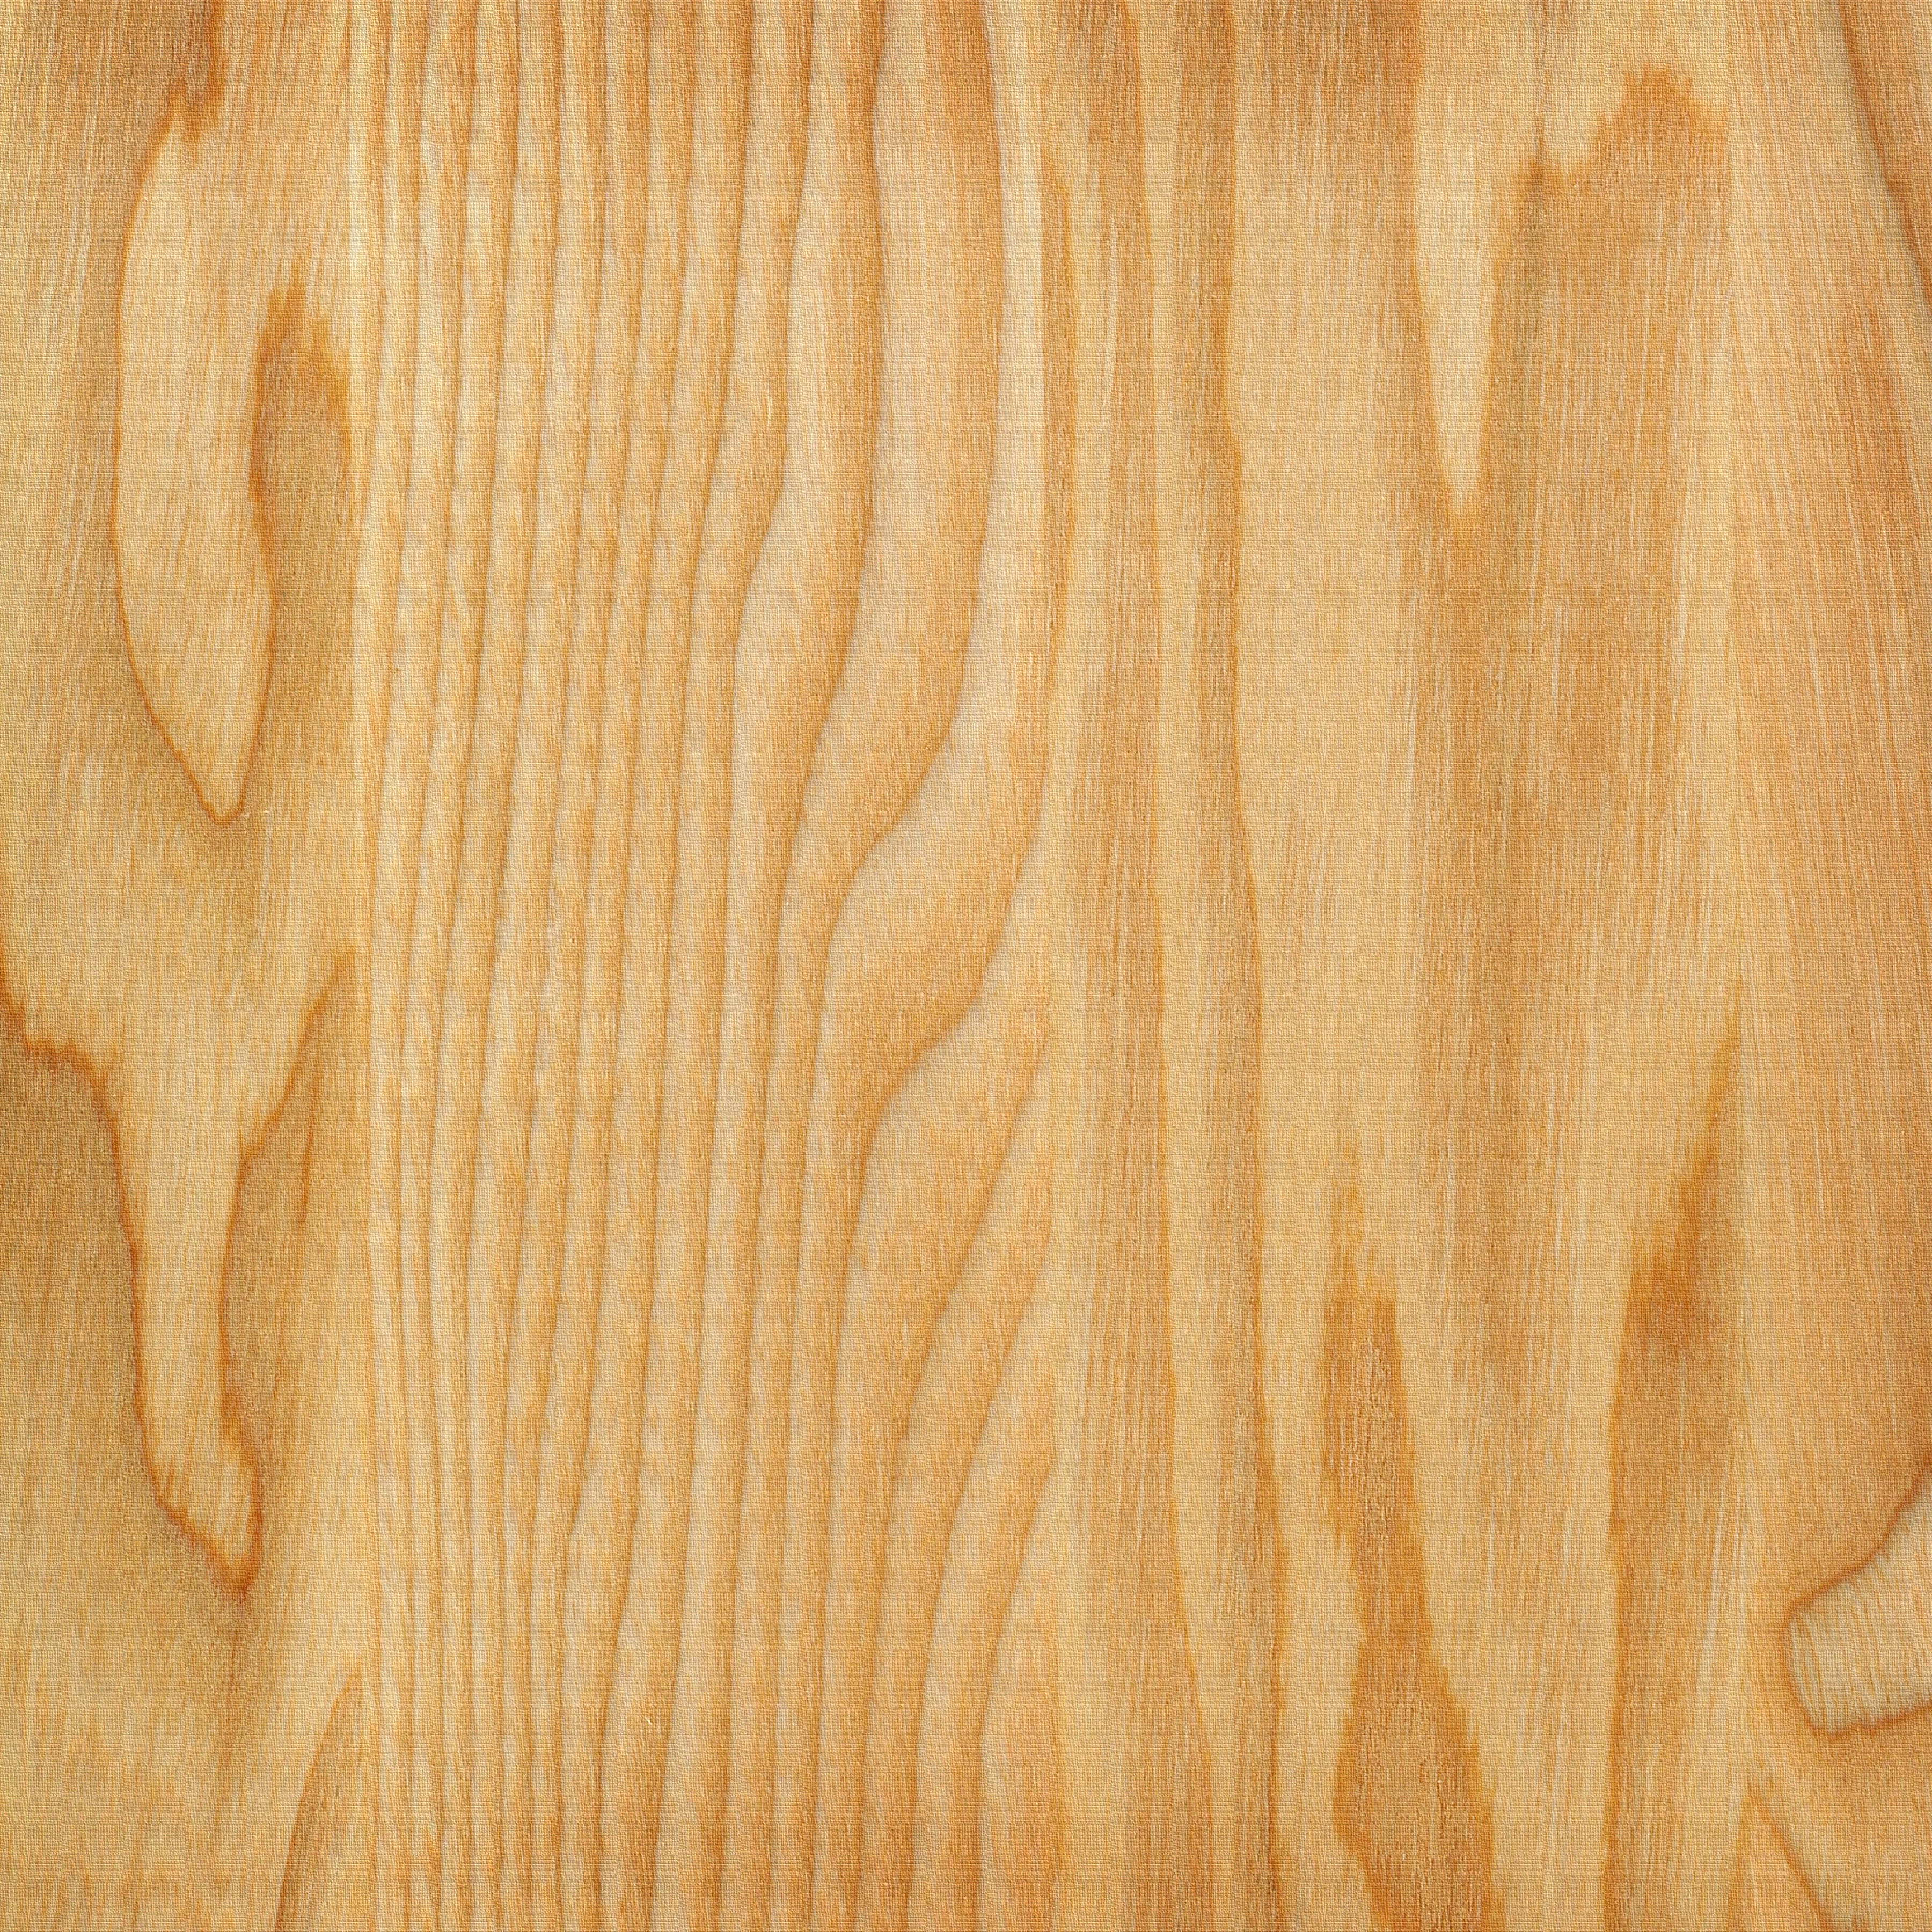 Wooden Background Thirty eight Photo Texture & Background